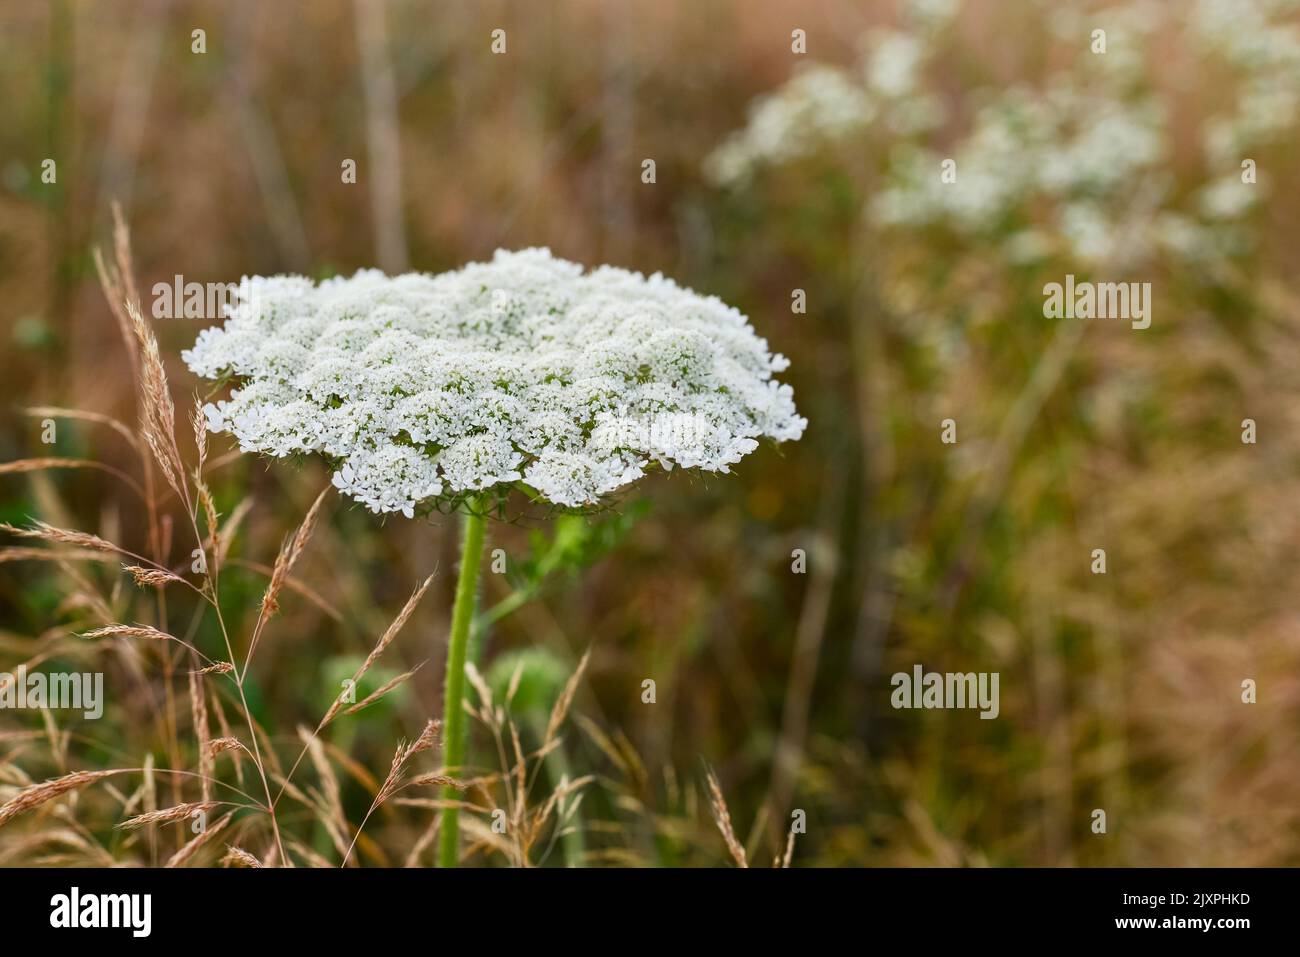 The hogweed a huge plant with large white parasol-like flowers, a dangerous plant for humans. Stock Photo